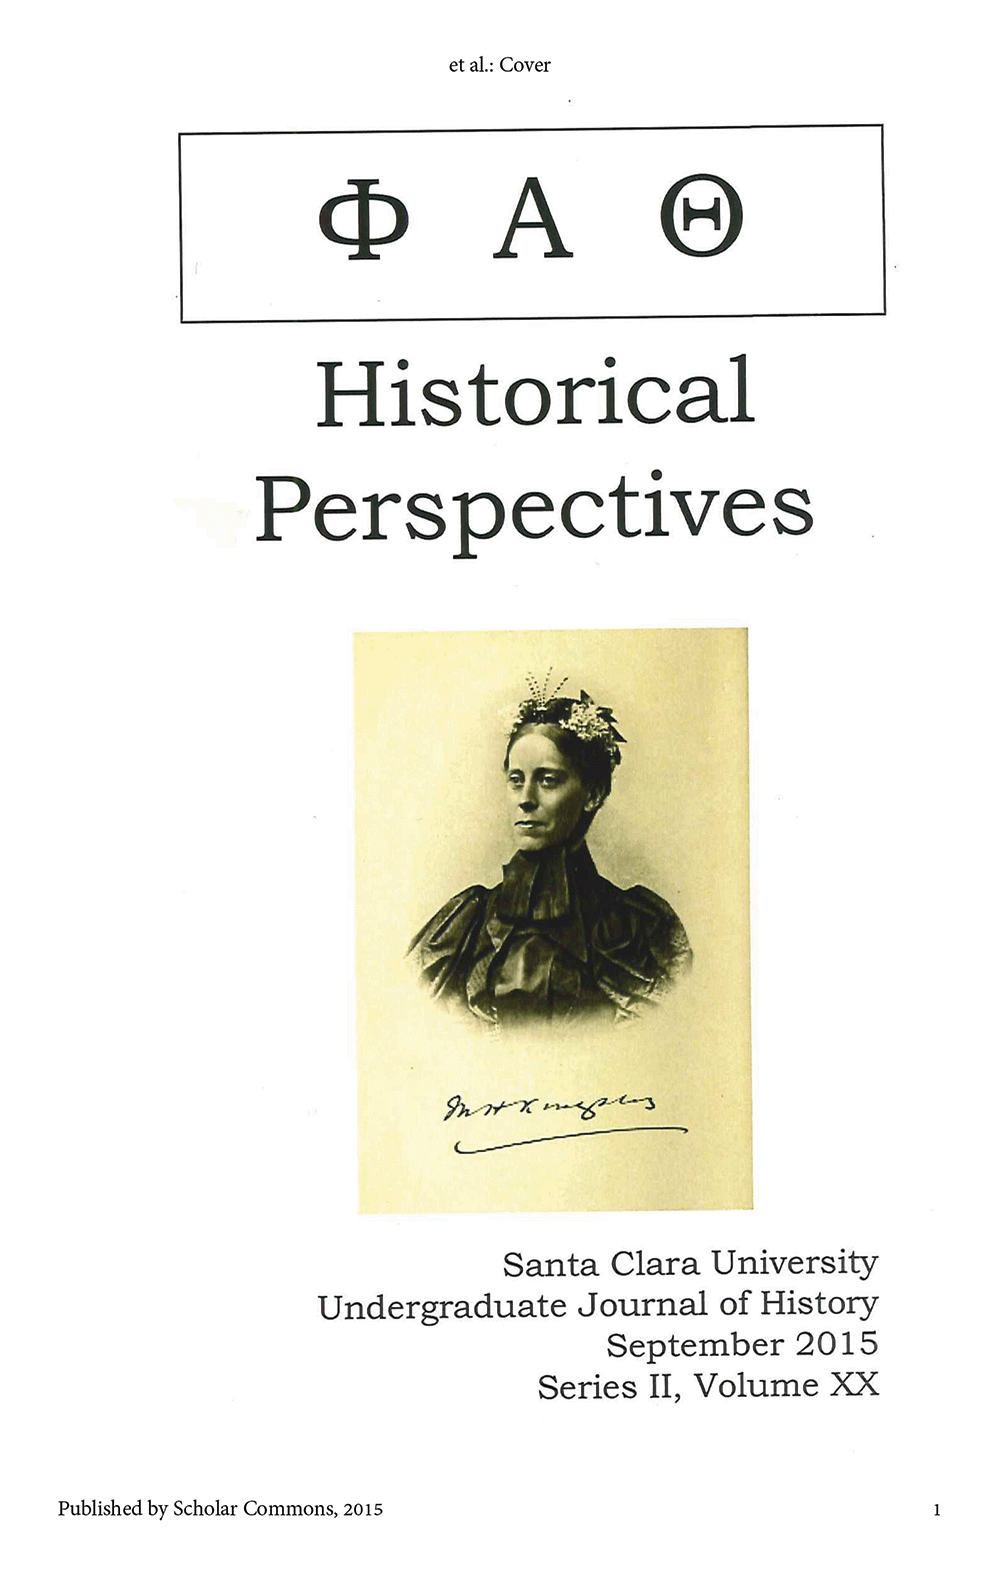 Historical Perspectives 2015, volume 20